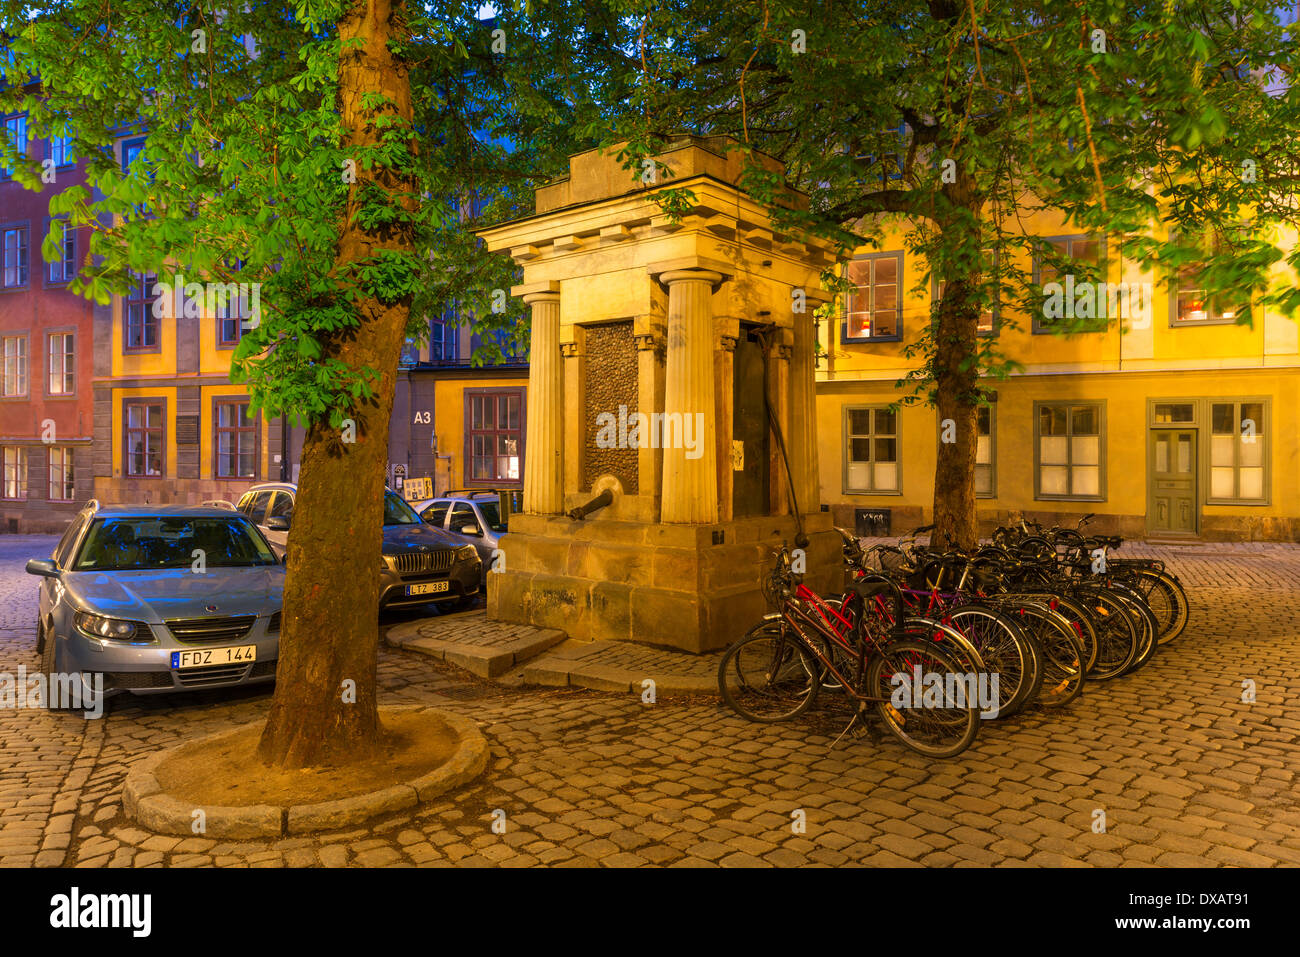 Tyska Brunnsplan, a small triangular square with a historic well in Gamla Stan, The old town, of Stockholm, Sweden. Stock Photo